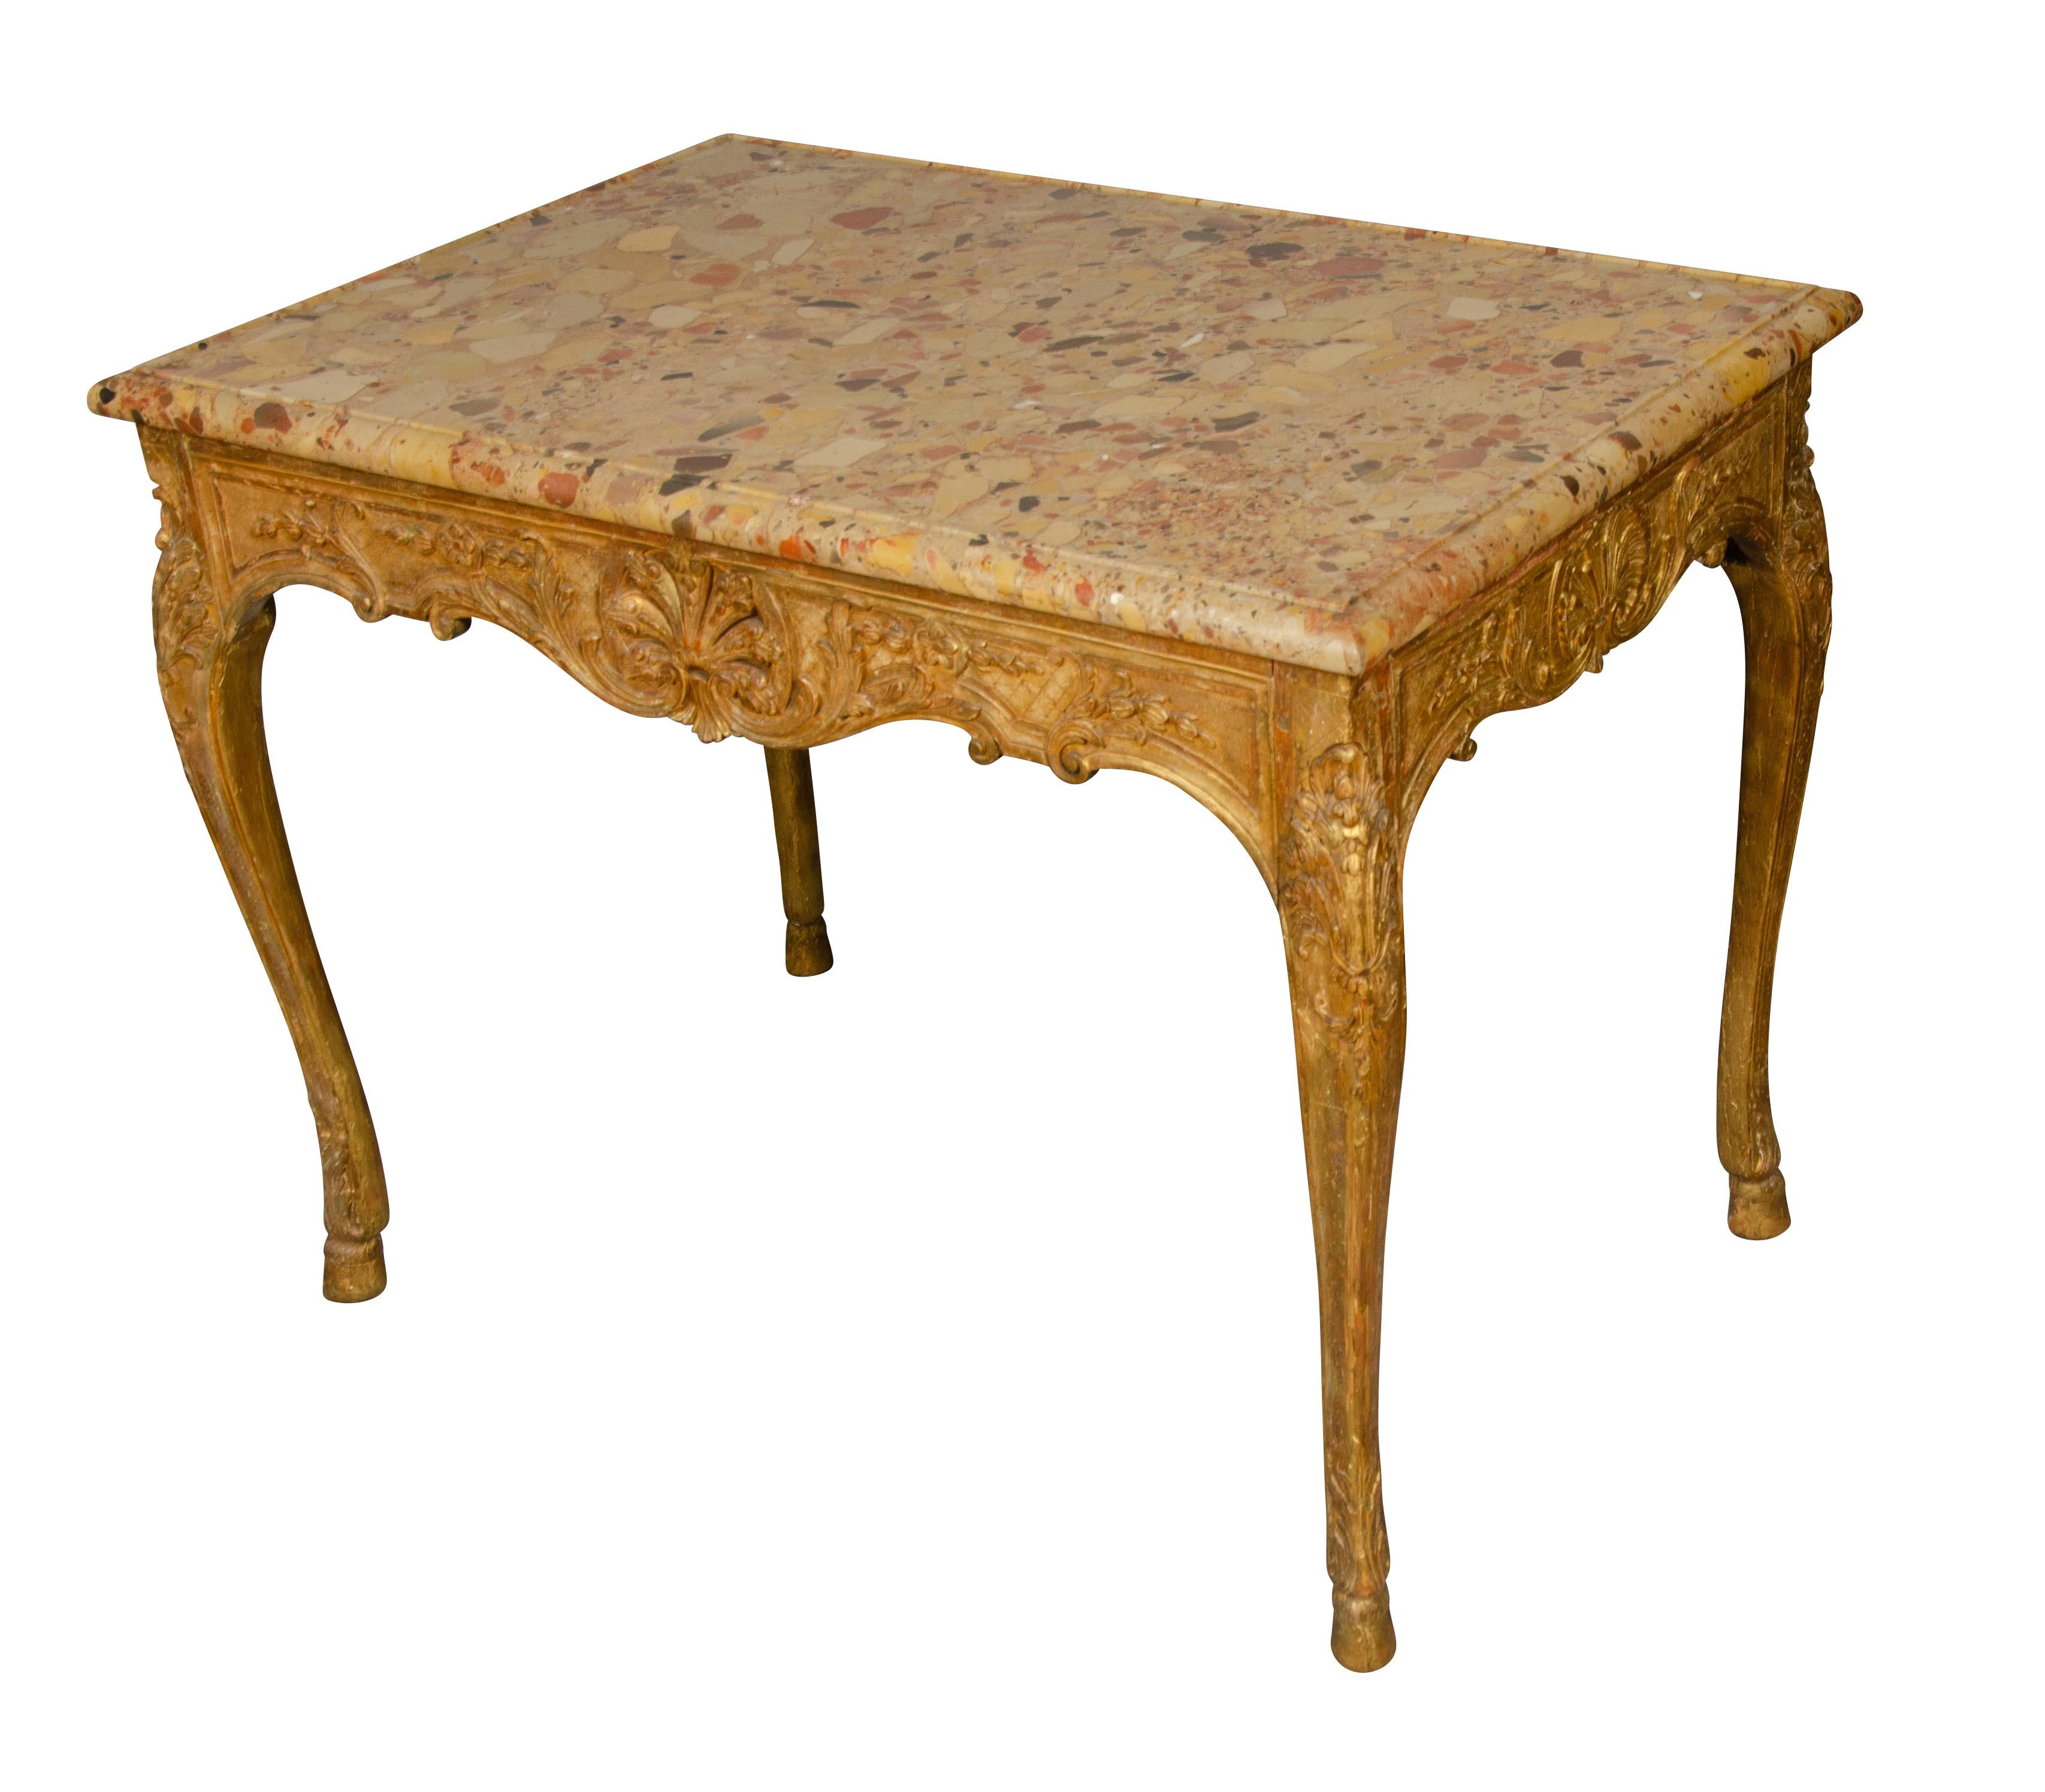 Fine Regence Giltwood Center Table In Good Condition For Sale In Essex, MA